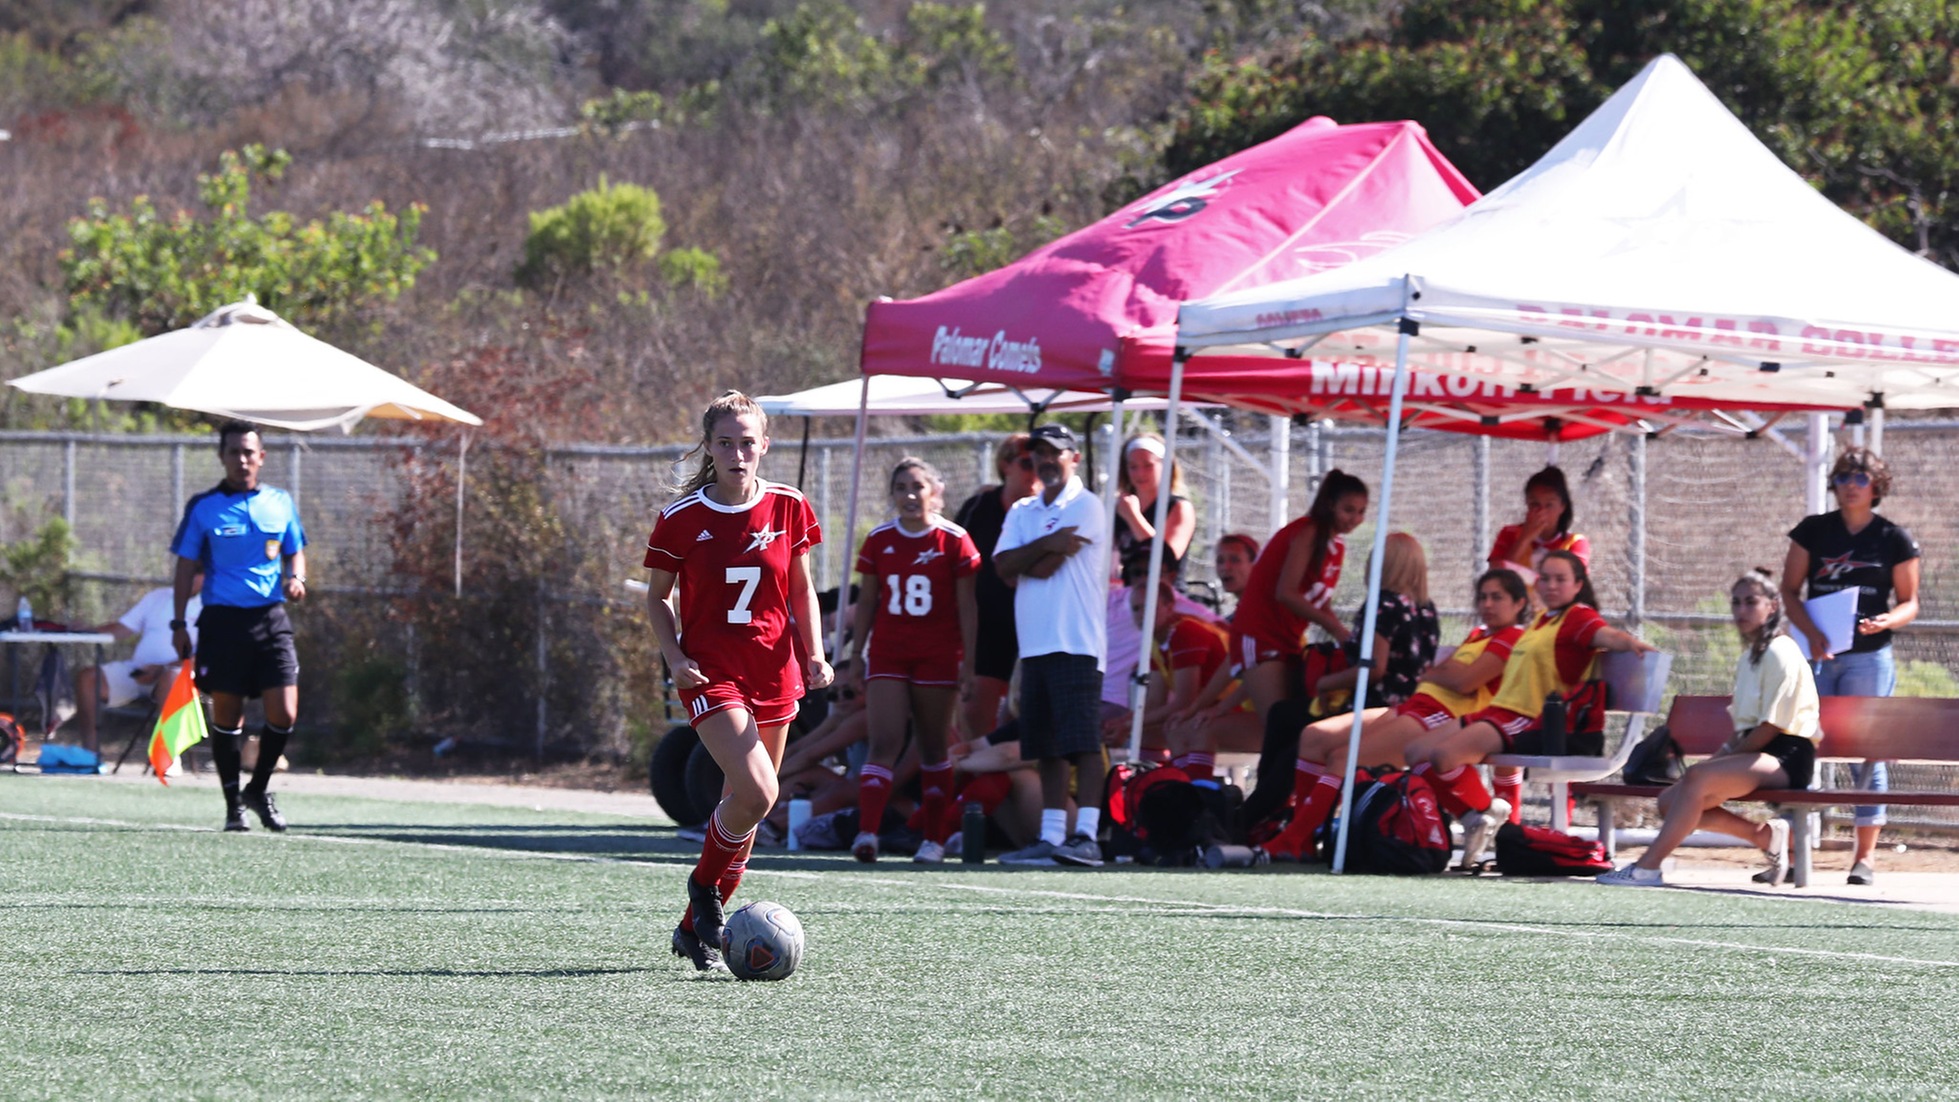 Alyssa Jackson scored her first career goal against San Diego City College on Tuesday. Photo by Hugh Cox (taken on 9/13).